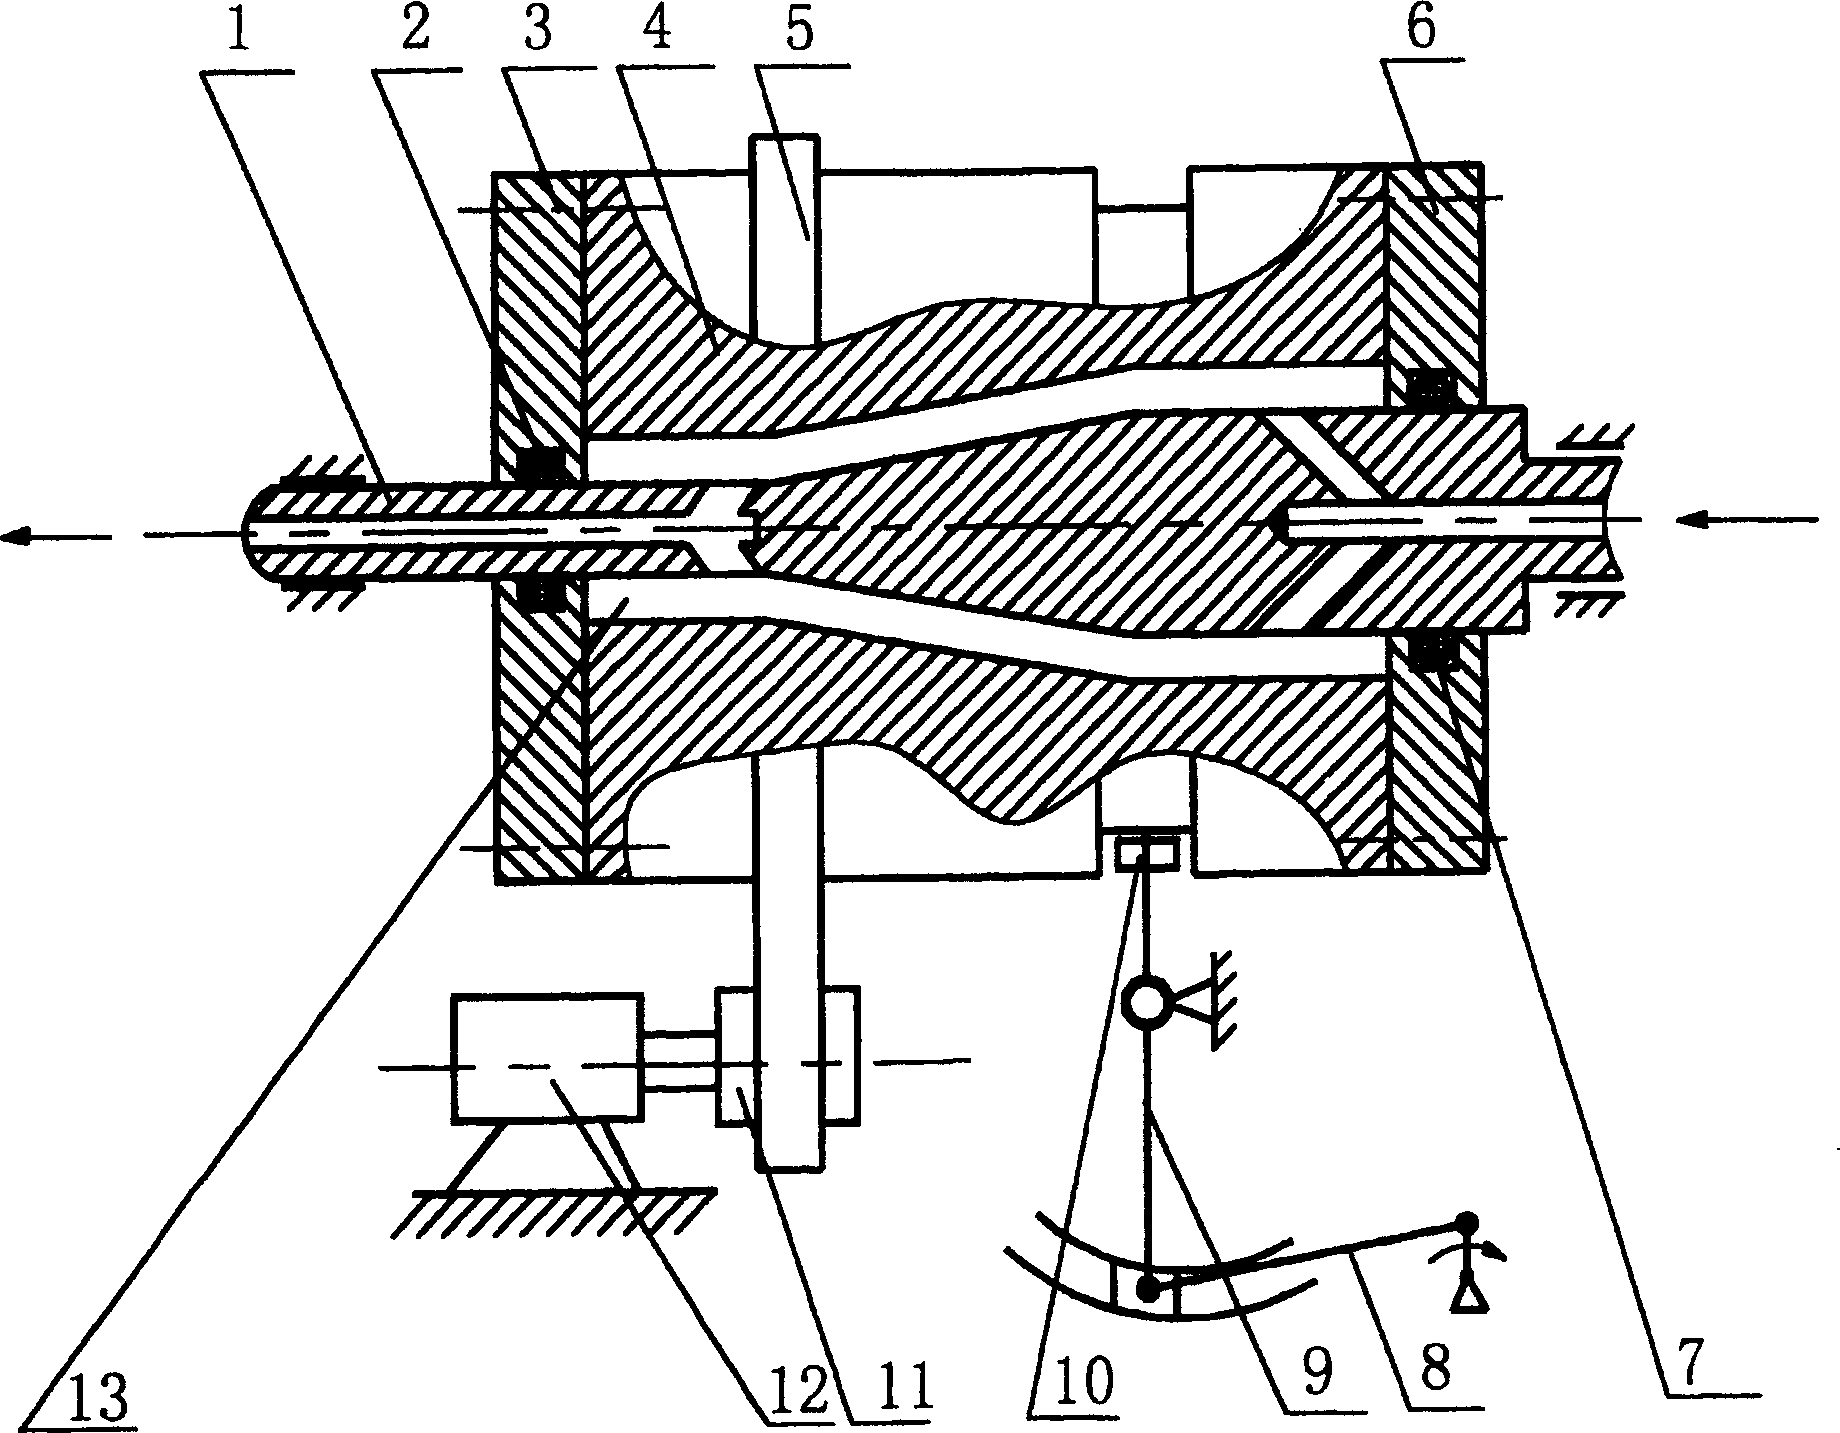 Auxiliary formation device of polymer product